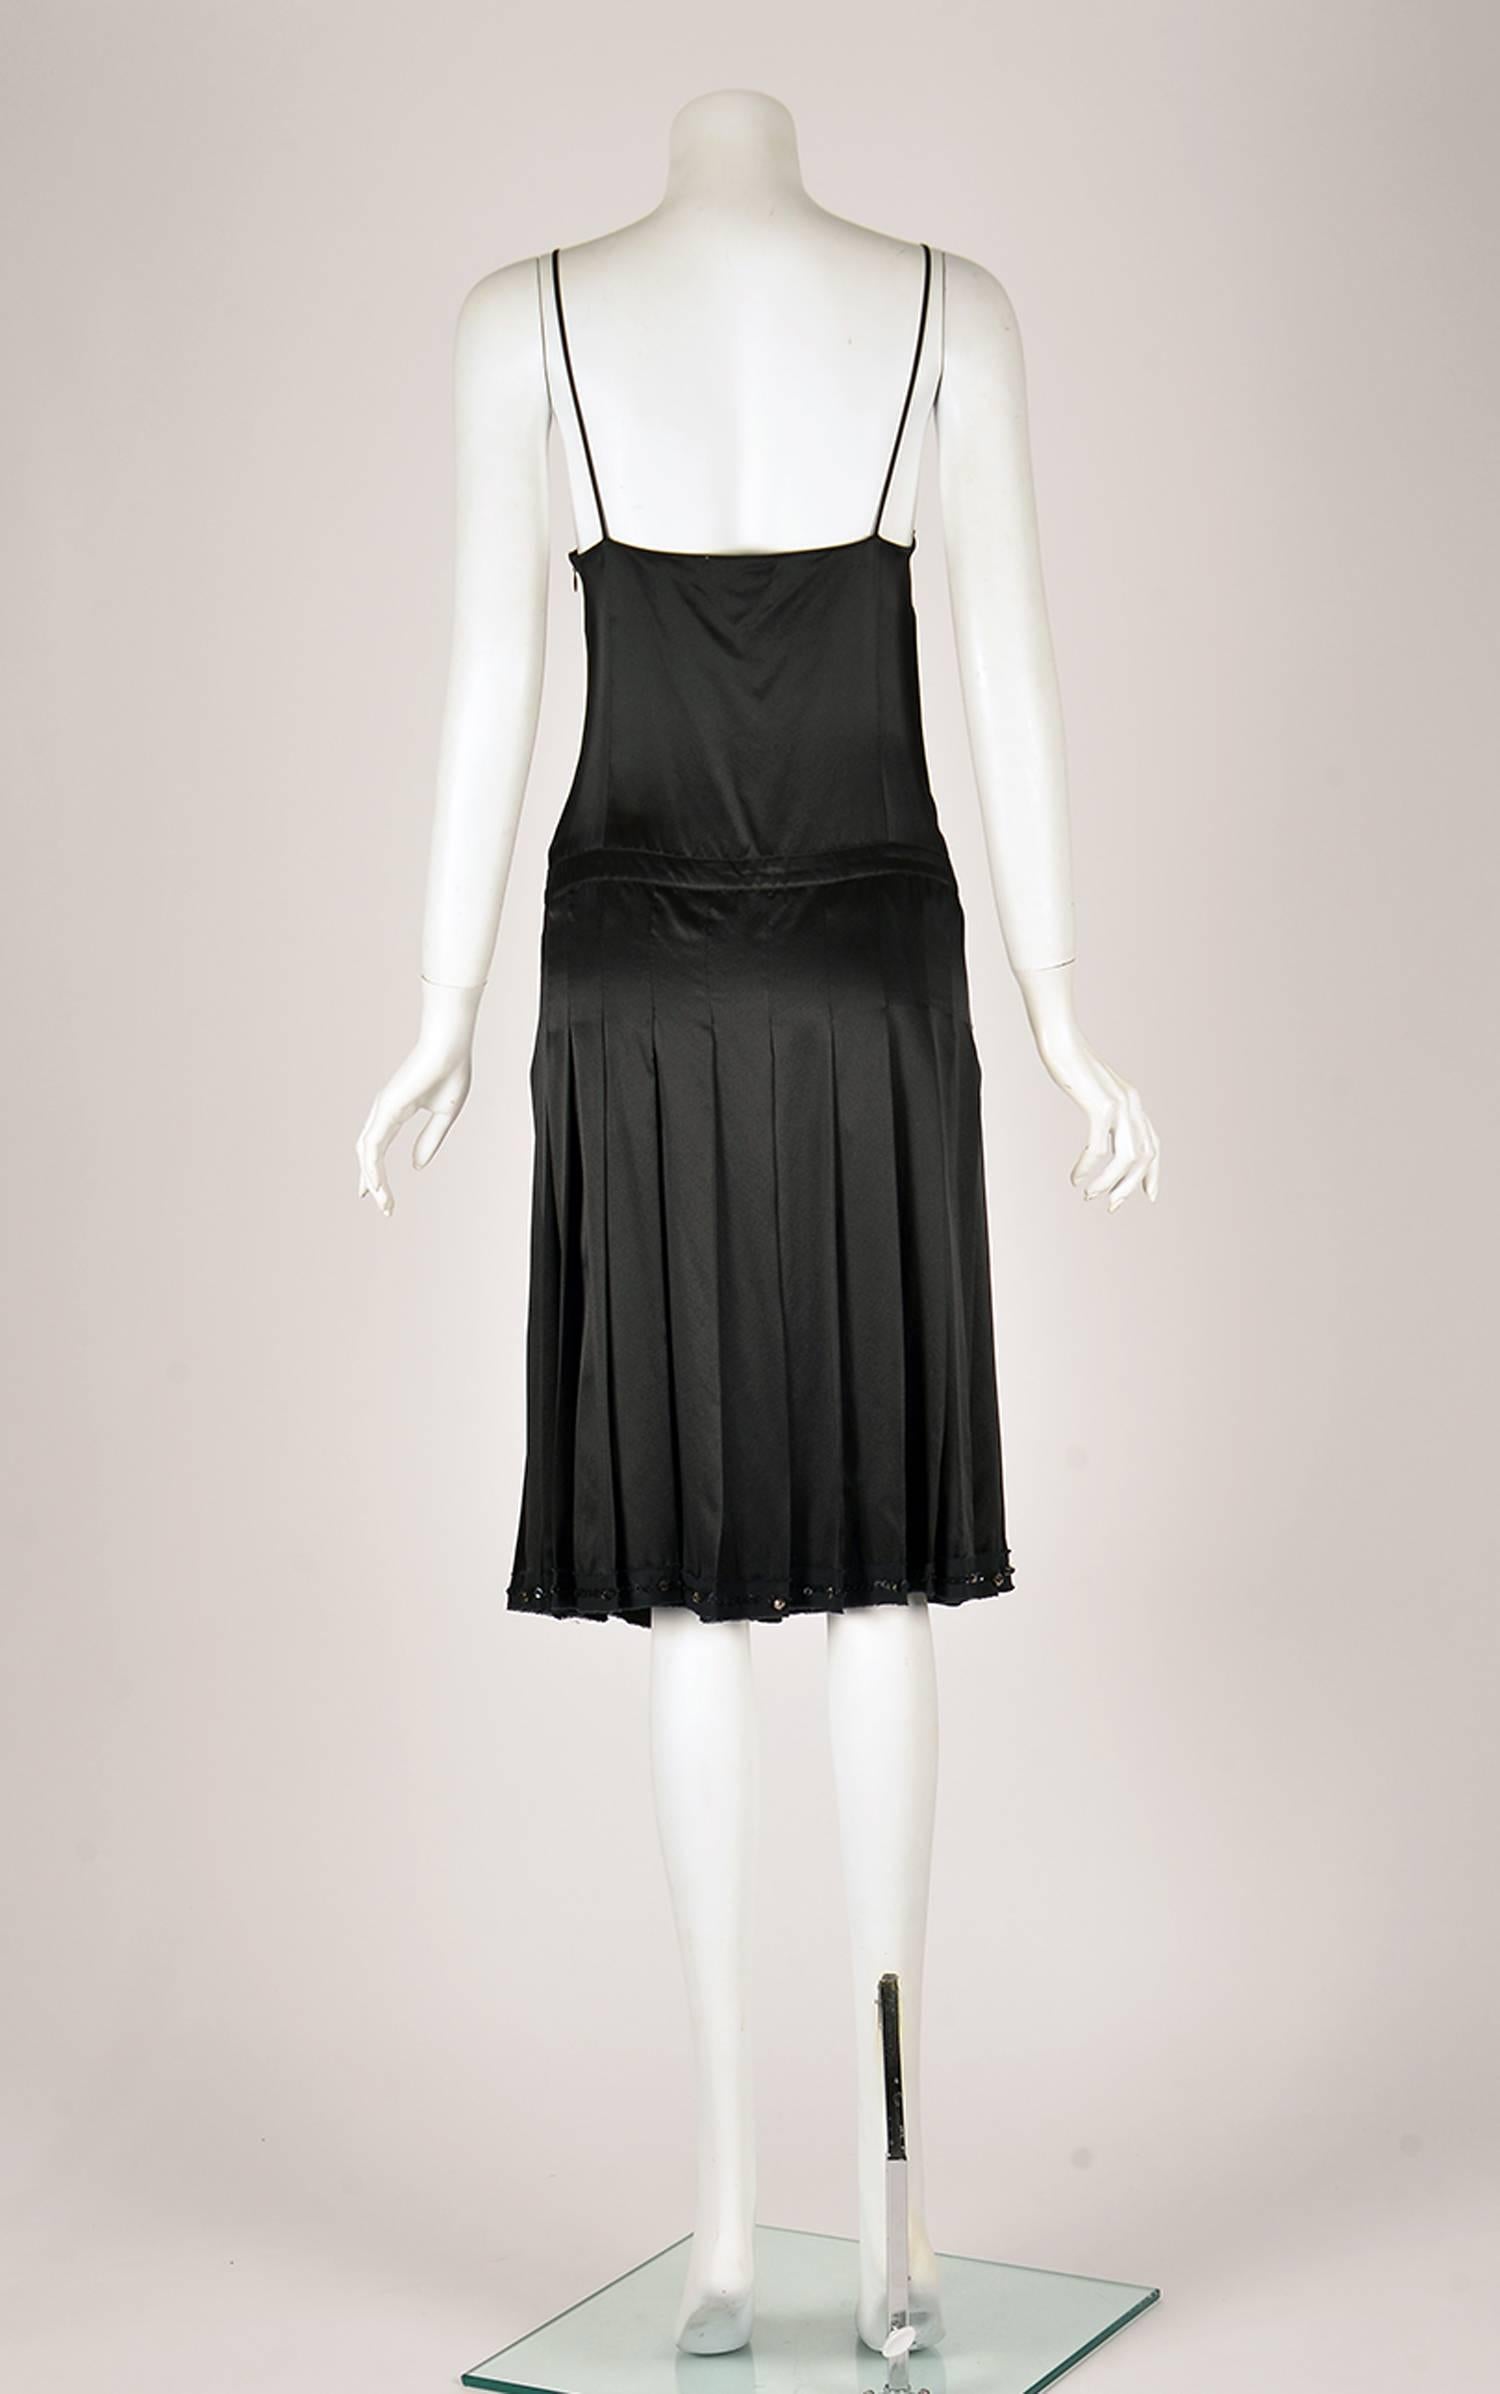 Moschino Black Silk Cocktail Dress with Bow Applique  In Excellent Condition For Sale In Houston, TX